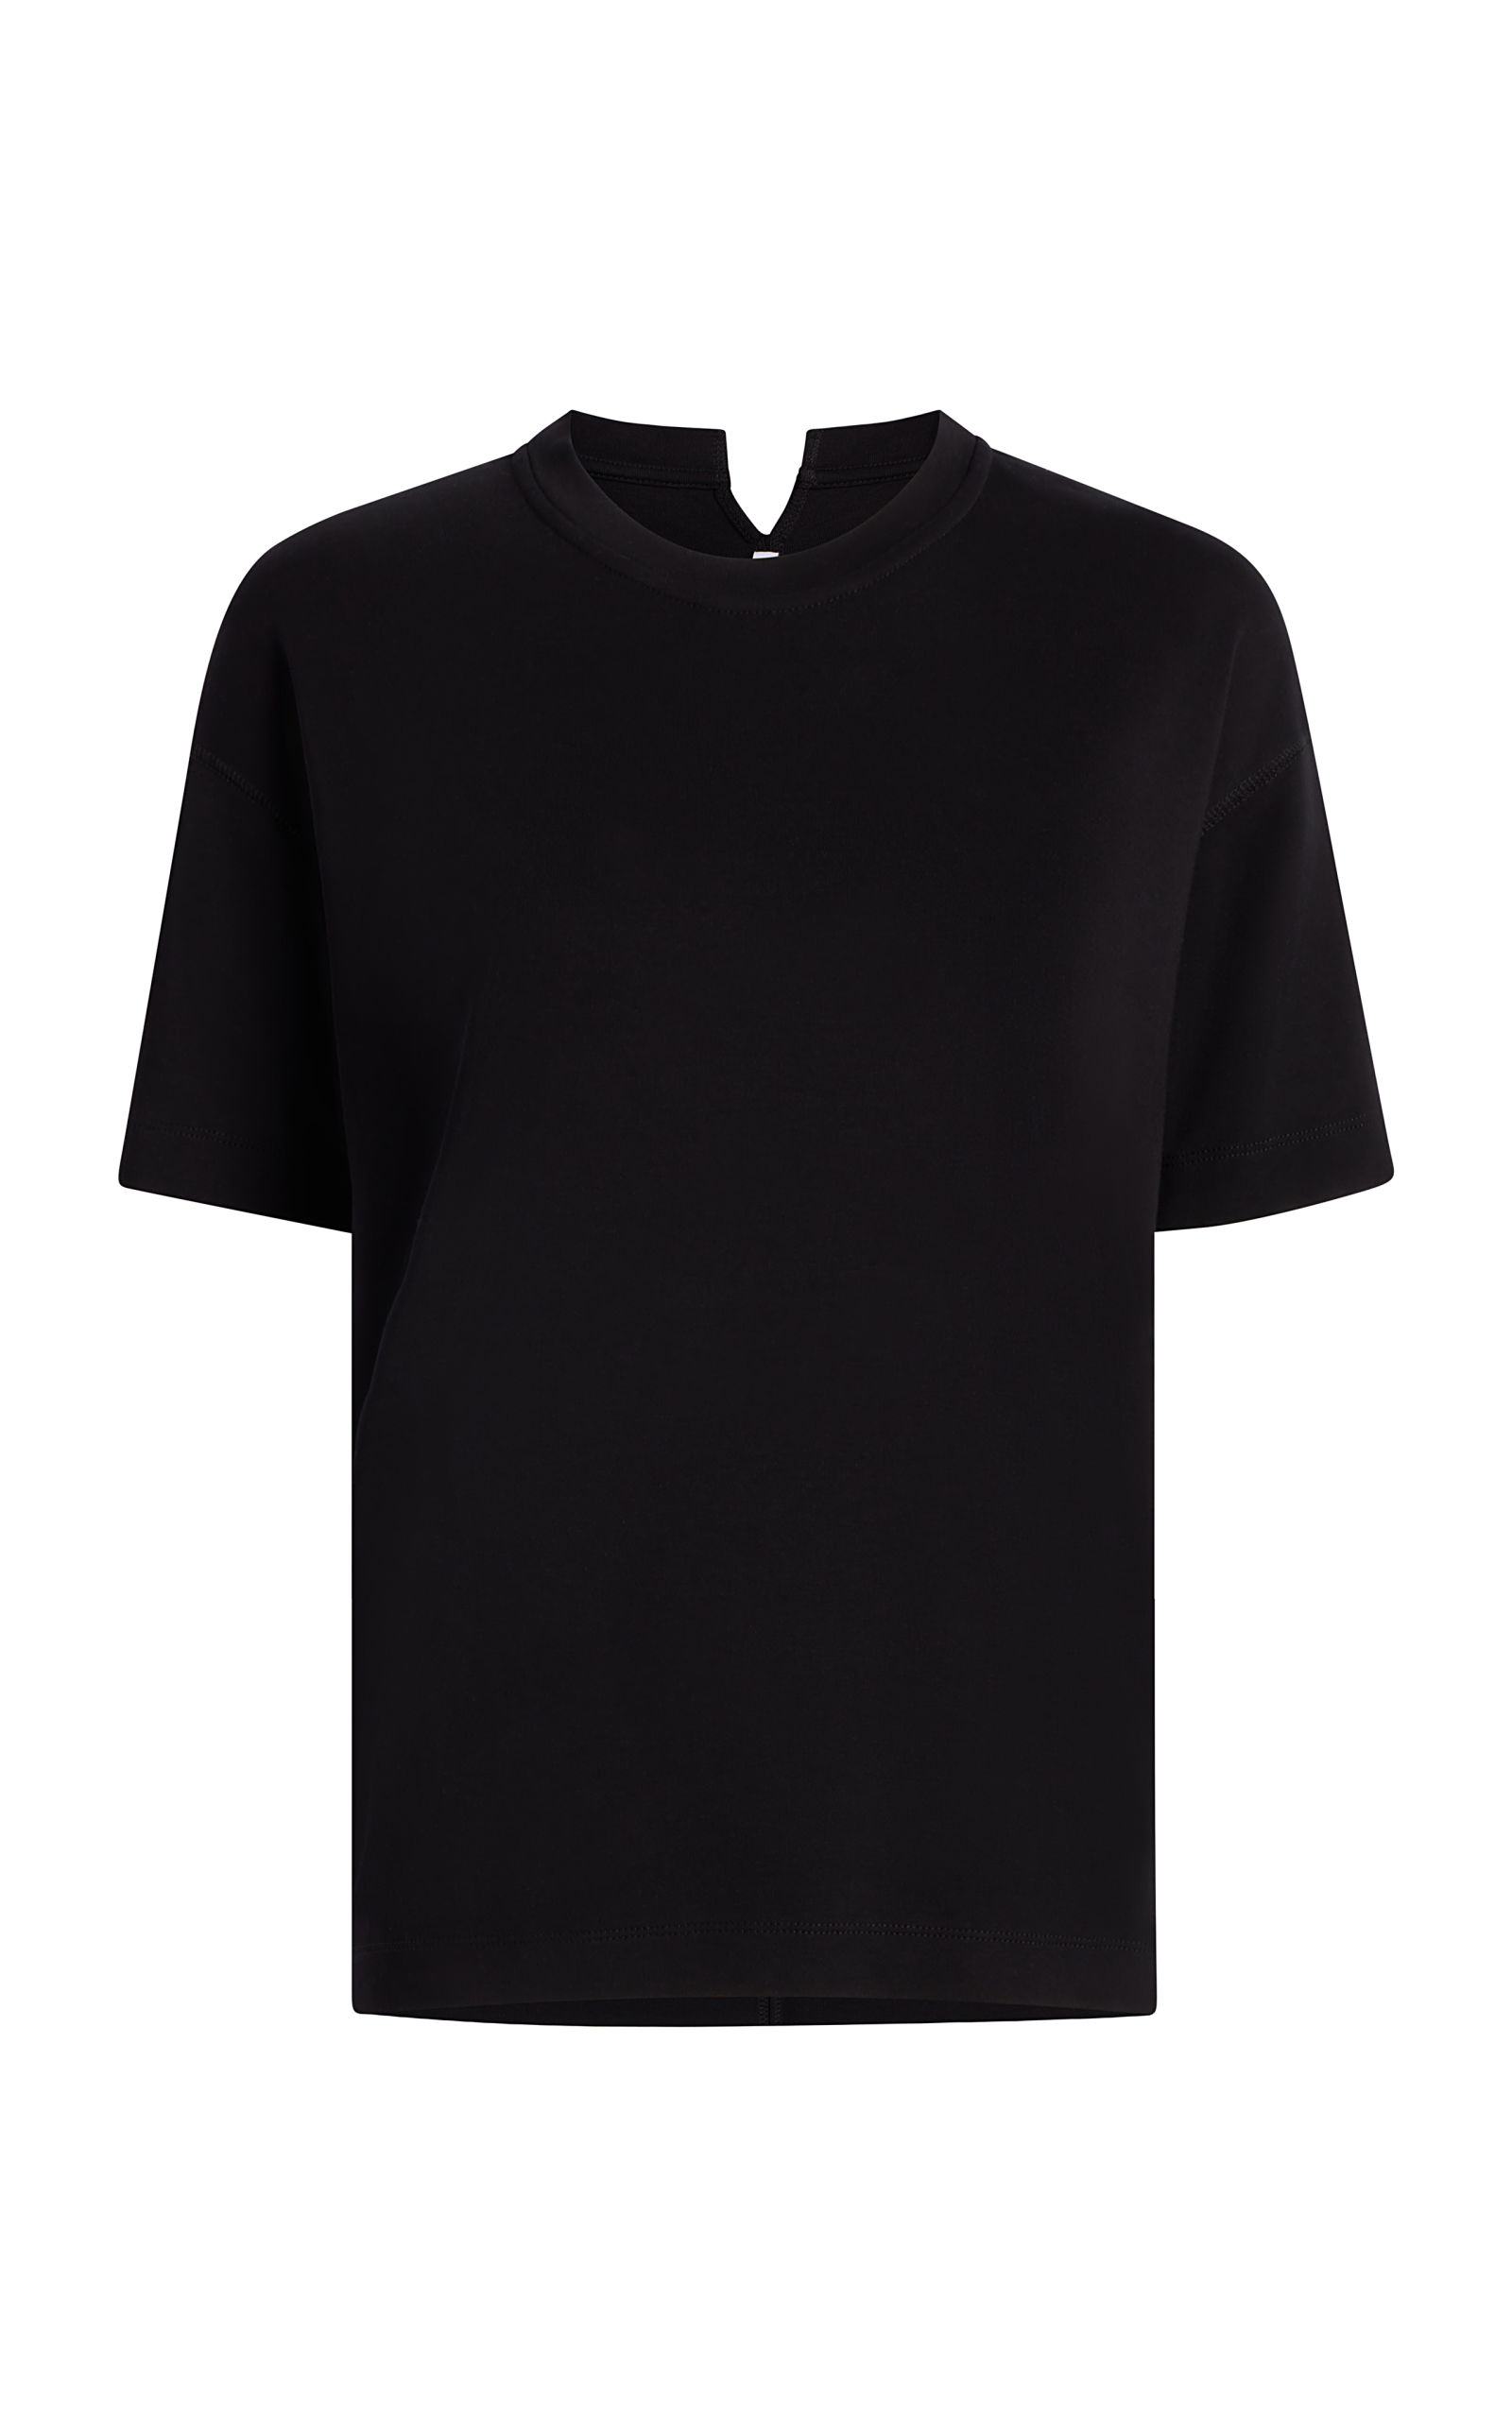 LUXE SEAMED SHORT SLEEVE BLACK A123CT037-CO-BLK